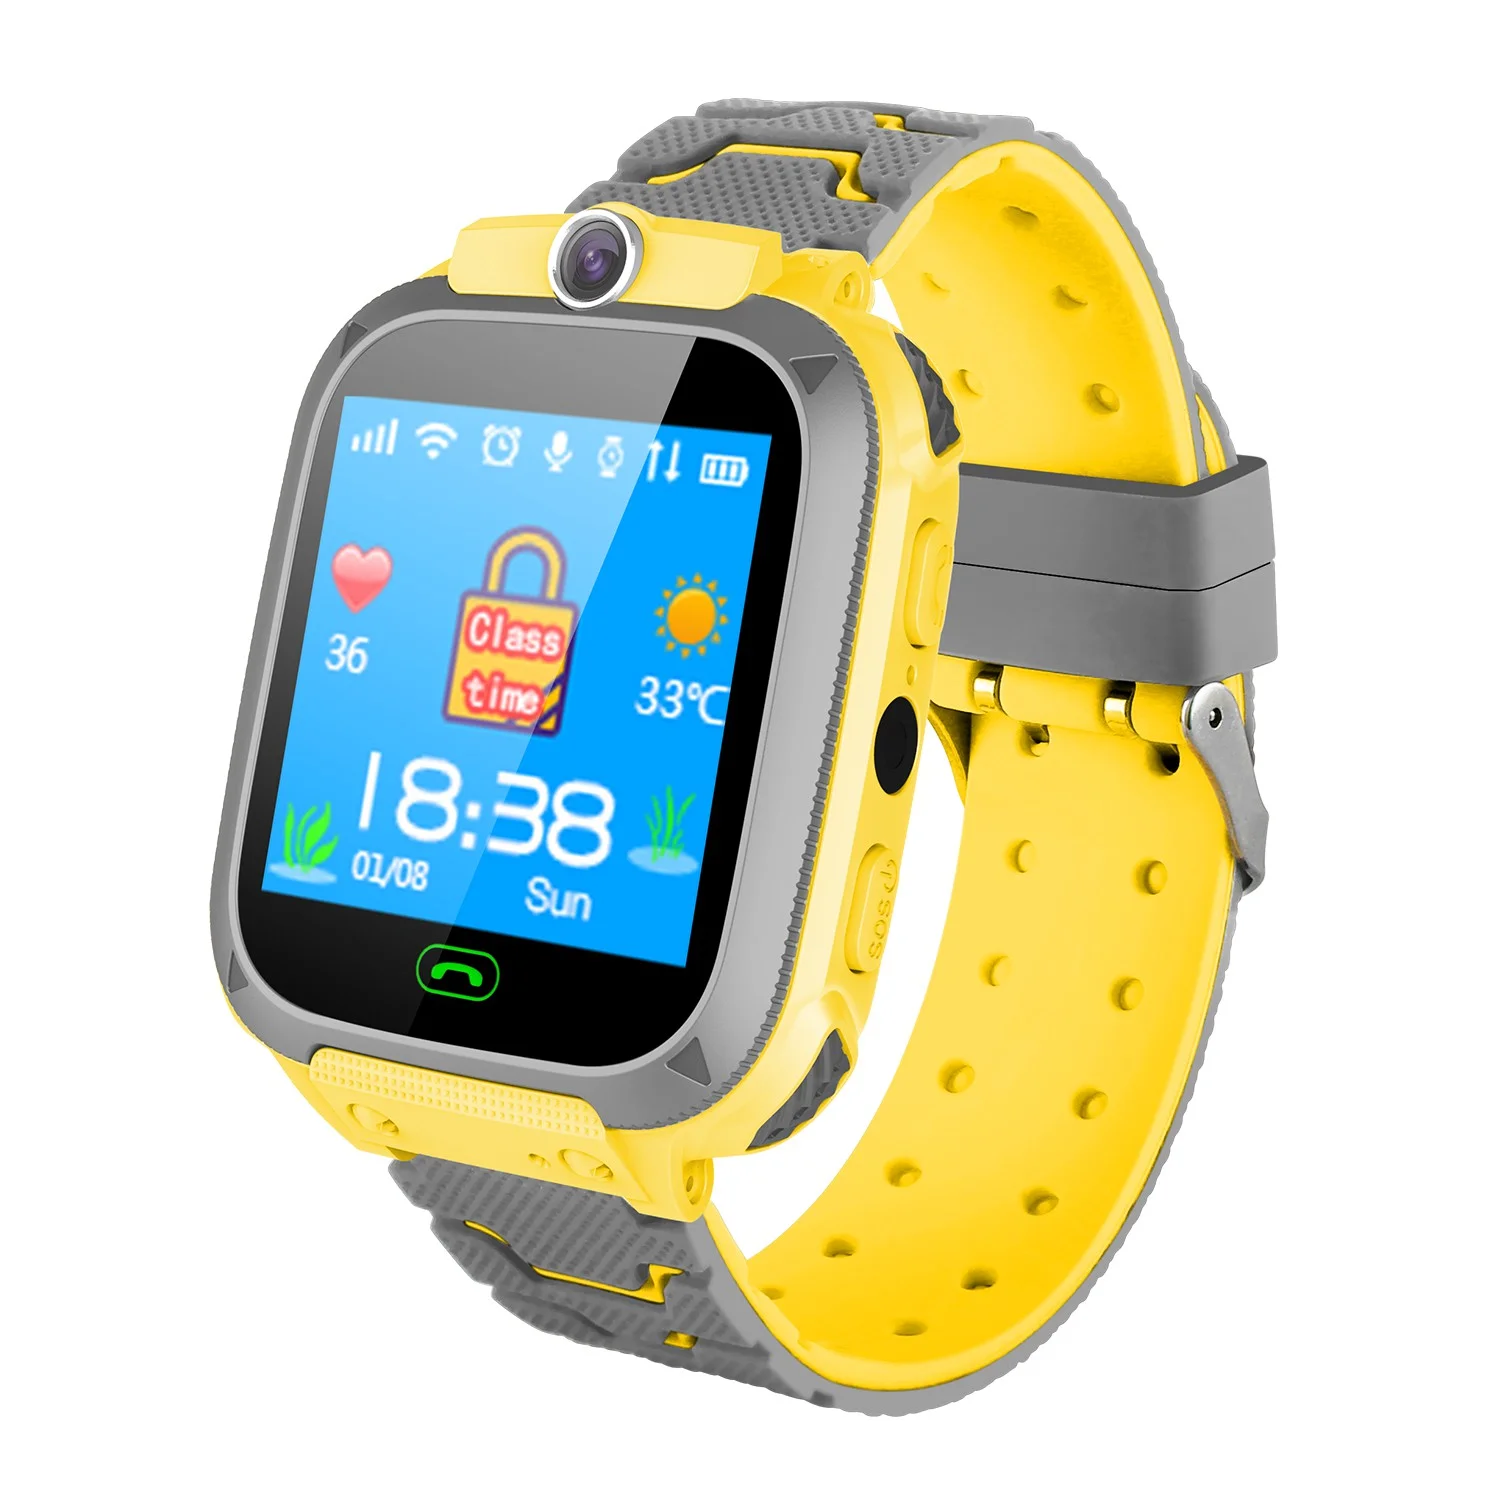 New Ve02 1.44 Inch Screen New Product Kids Smart Watch Phone Anti-lost Lbs  Tracking 2g Gps Wrist $7.9 - Wholesale China Relojes Inteligentes Wearable  Devices at Factory Prices from Shenzhen Nanway Industrial